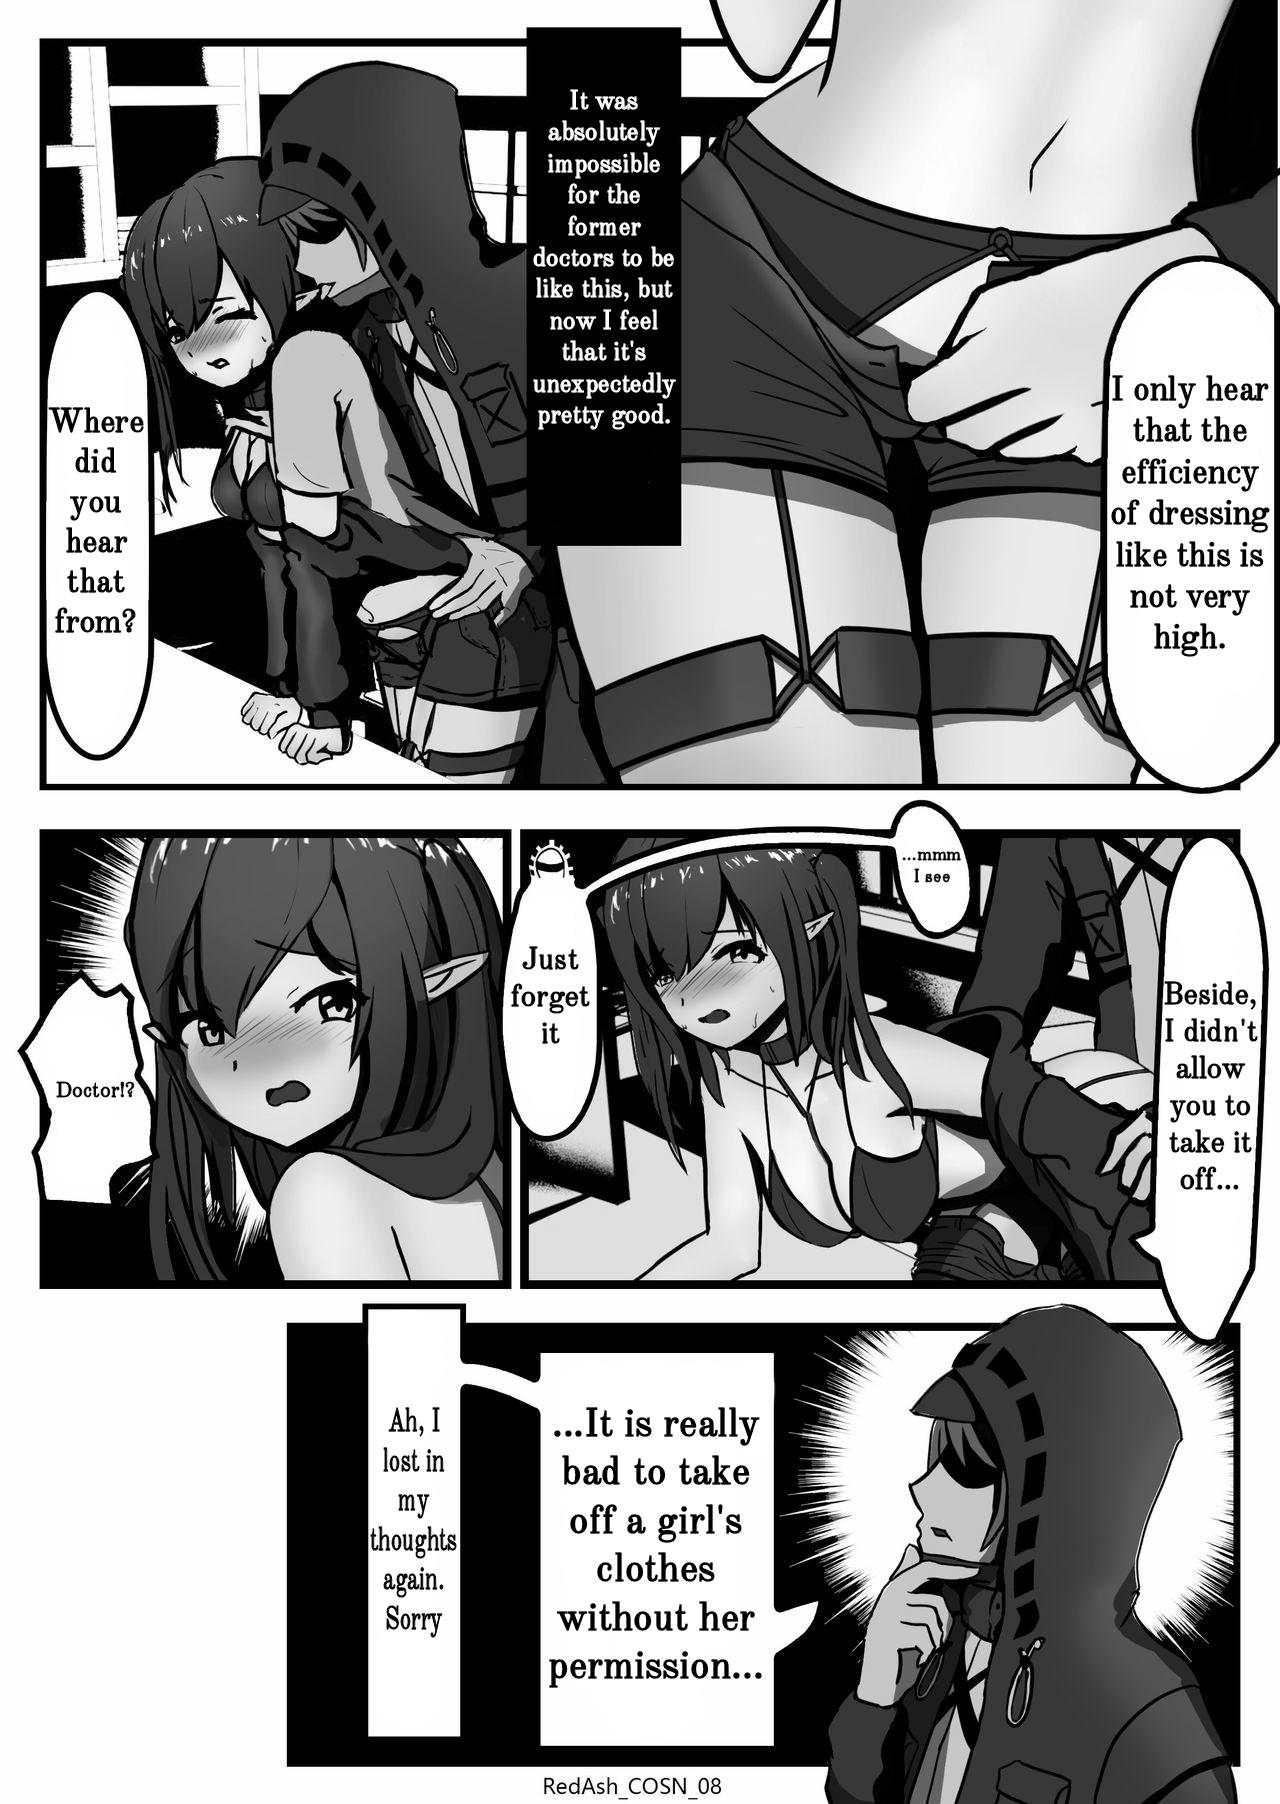 Bang Bros Closure is On Sale Now! - Arknights Hard Core Porn - Page 9